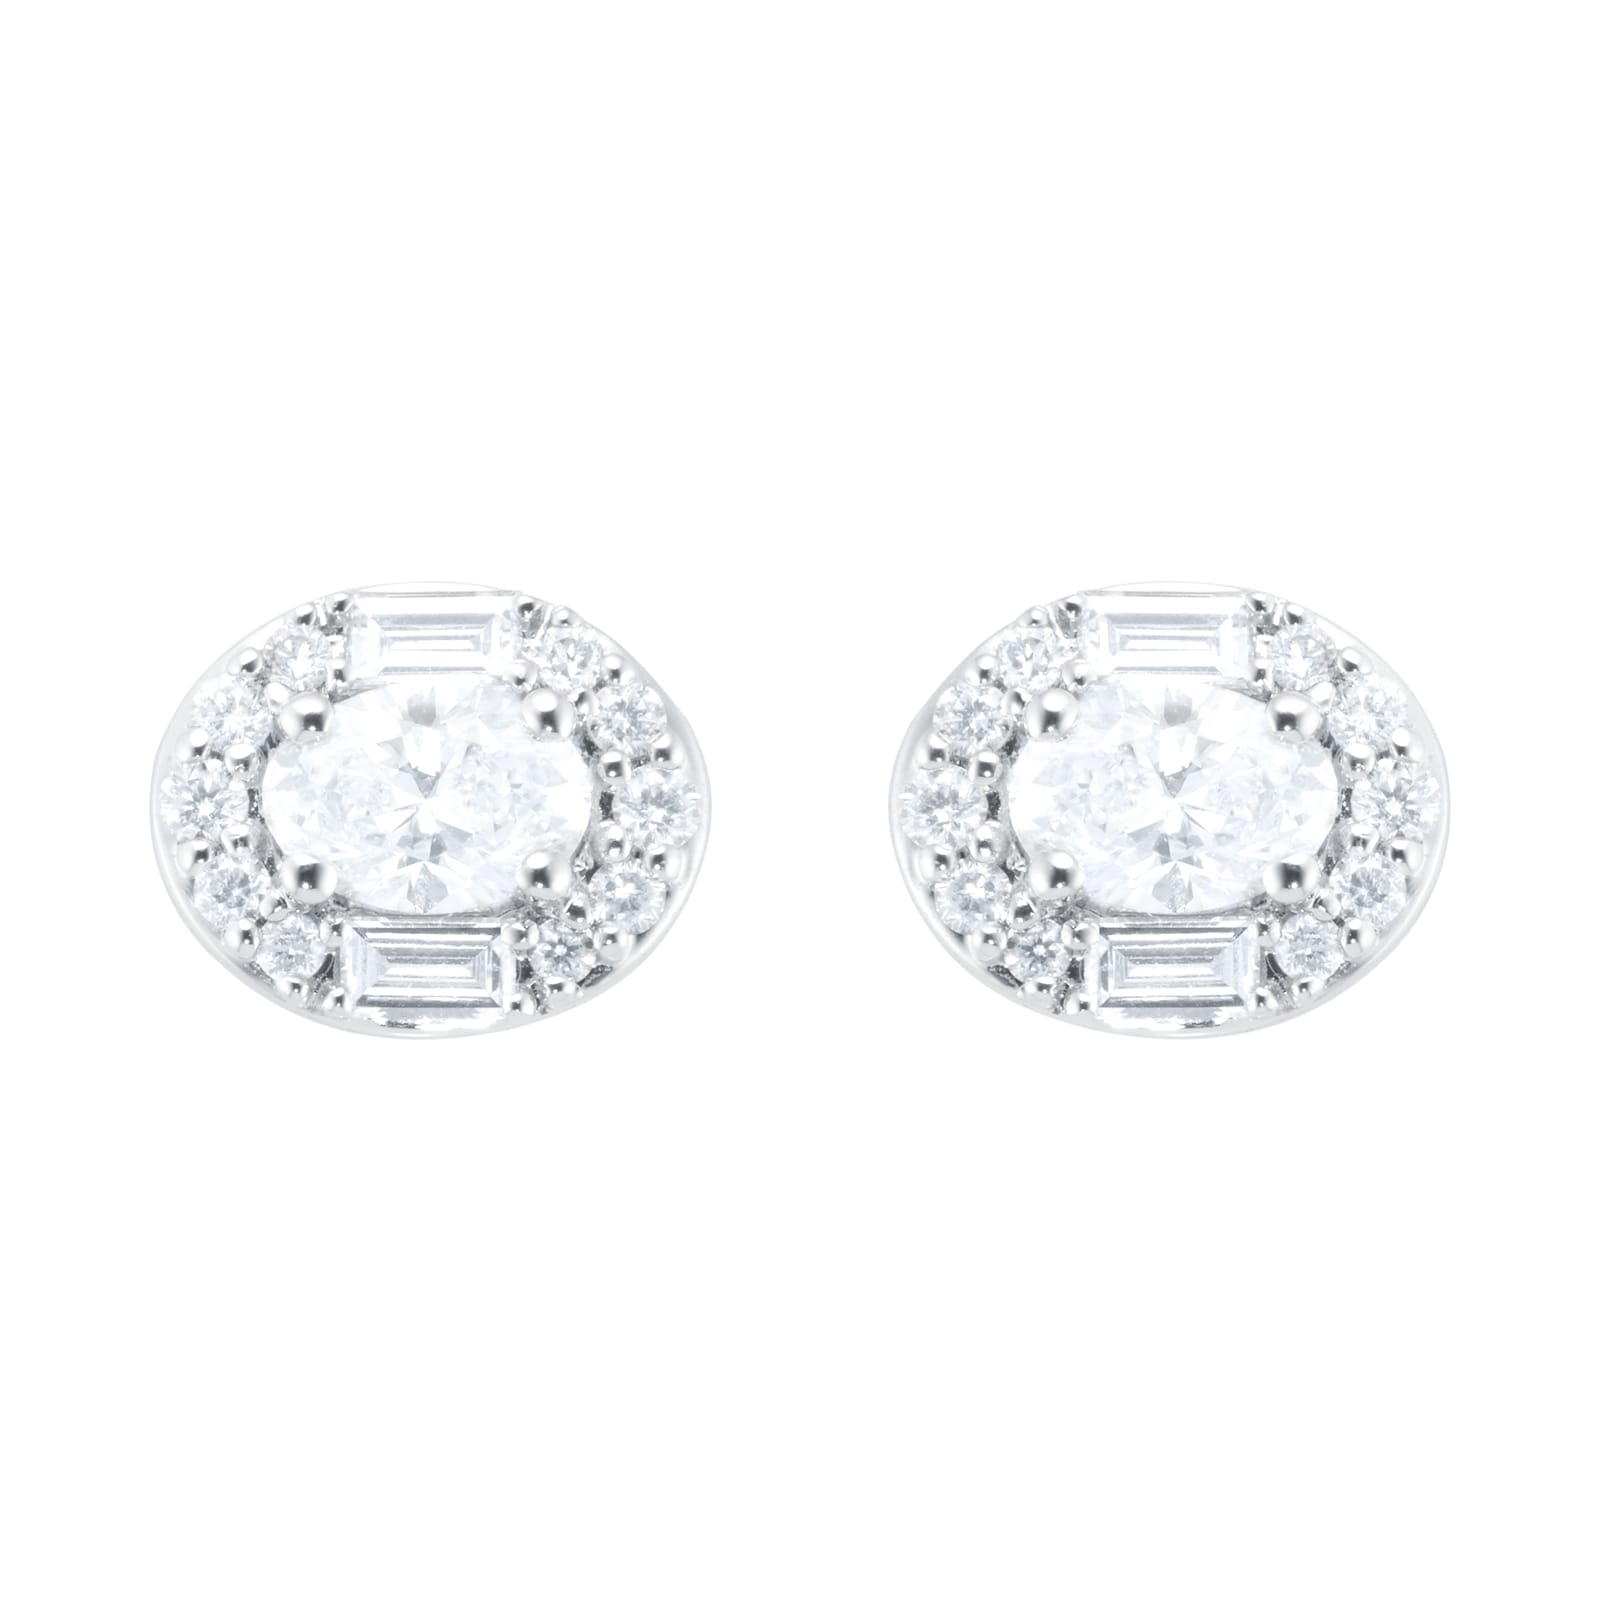 18ct White Gold 0.54cttw Diamond Oval Cluster Stud Earrings